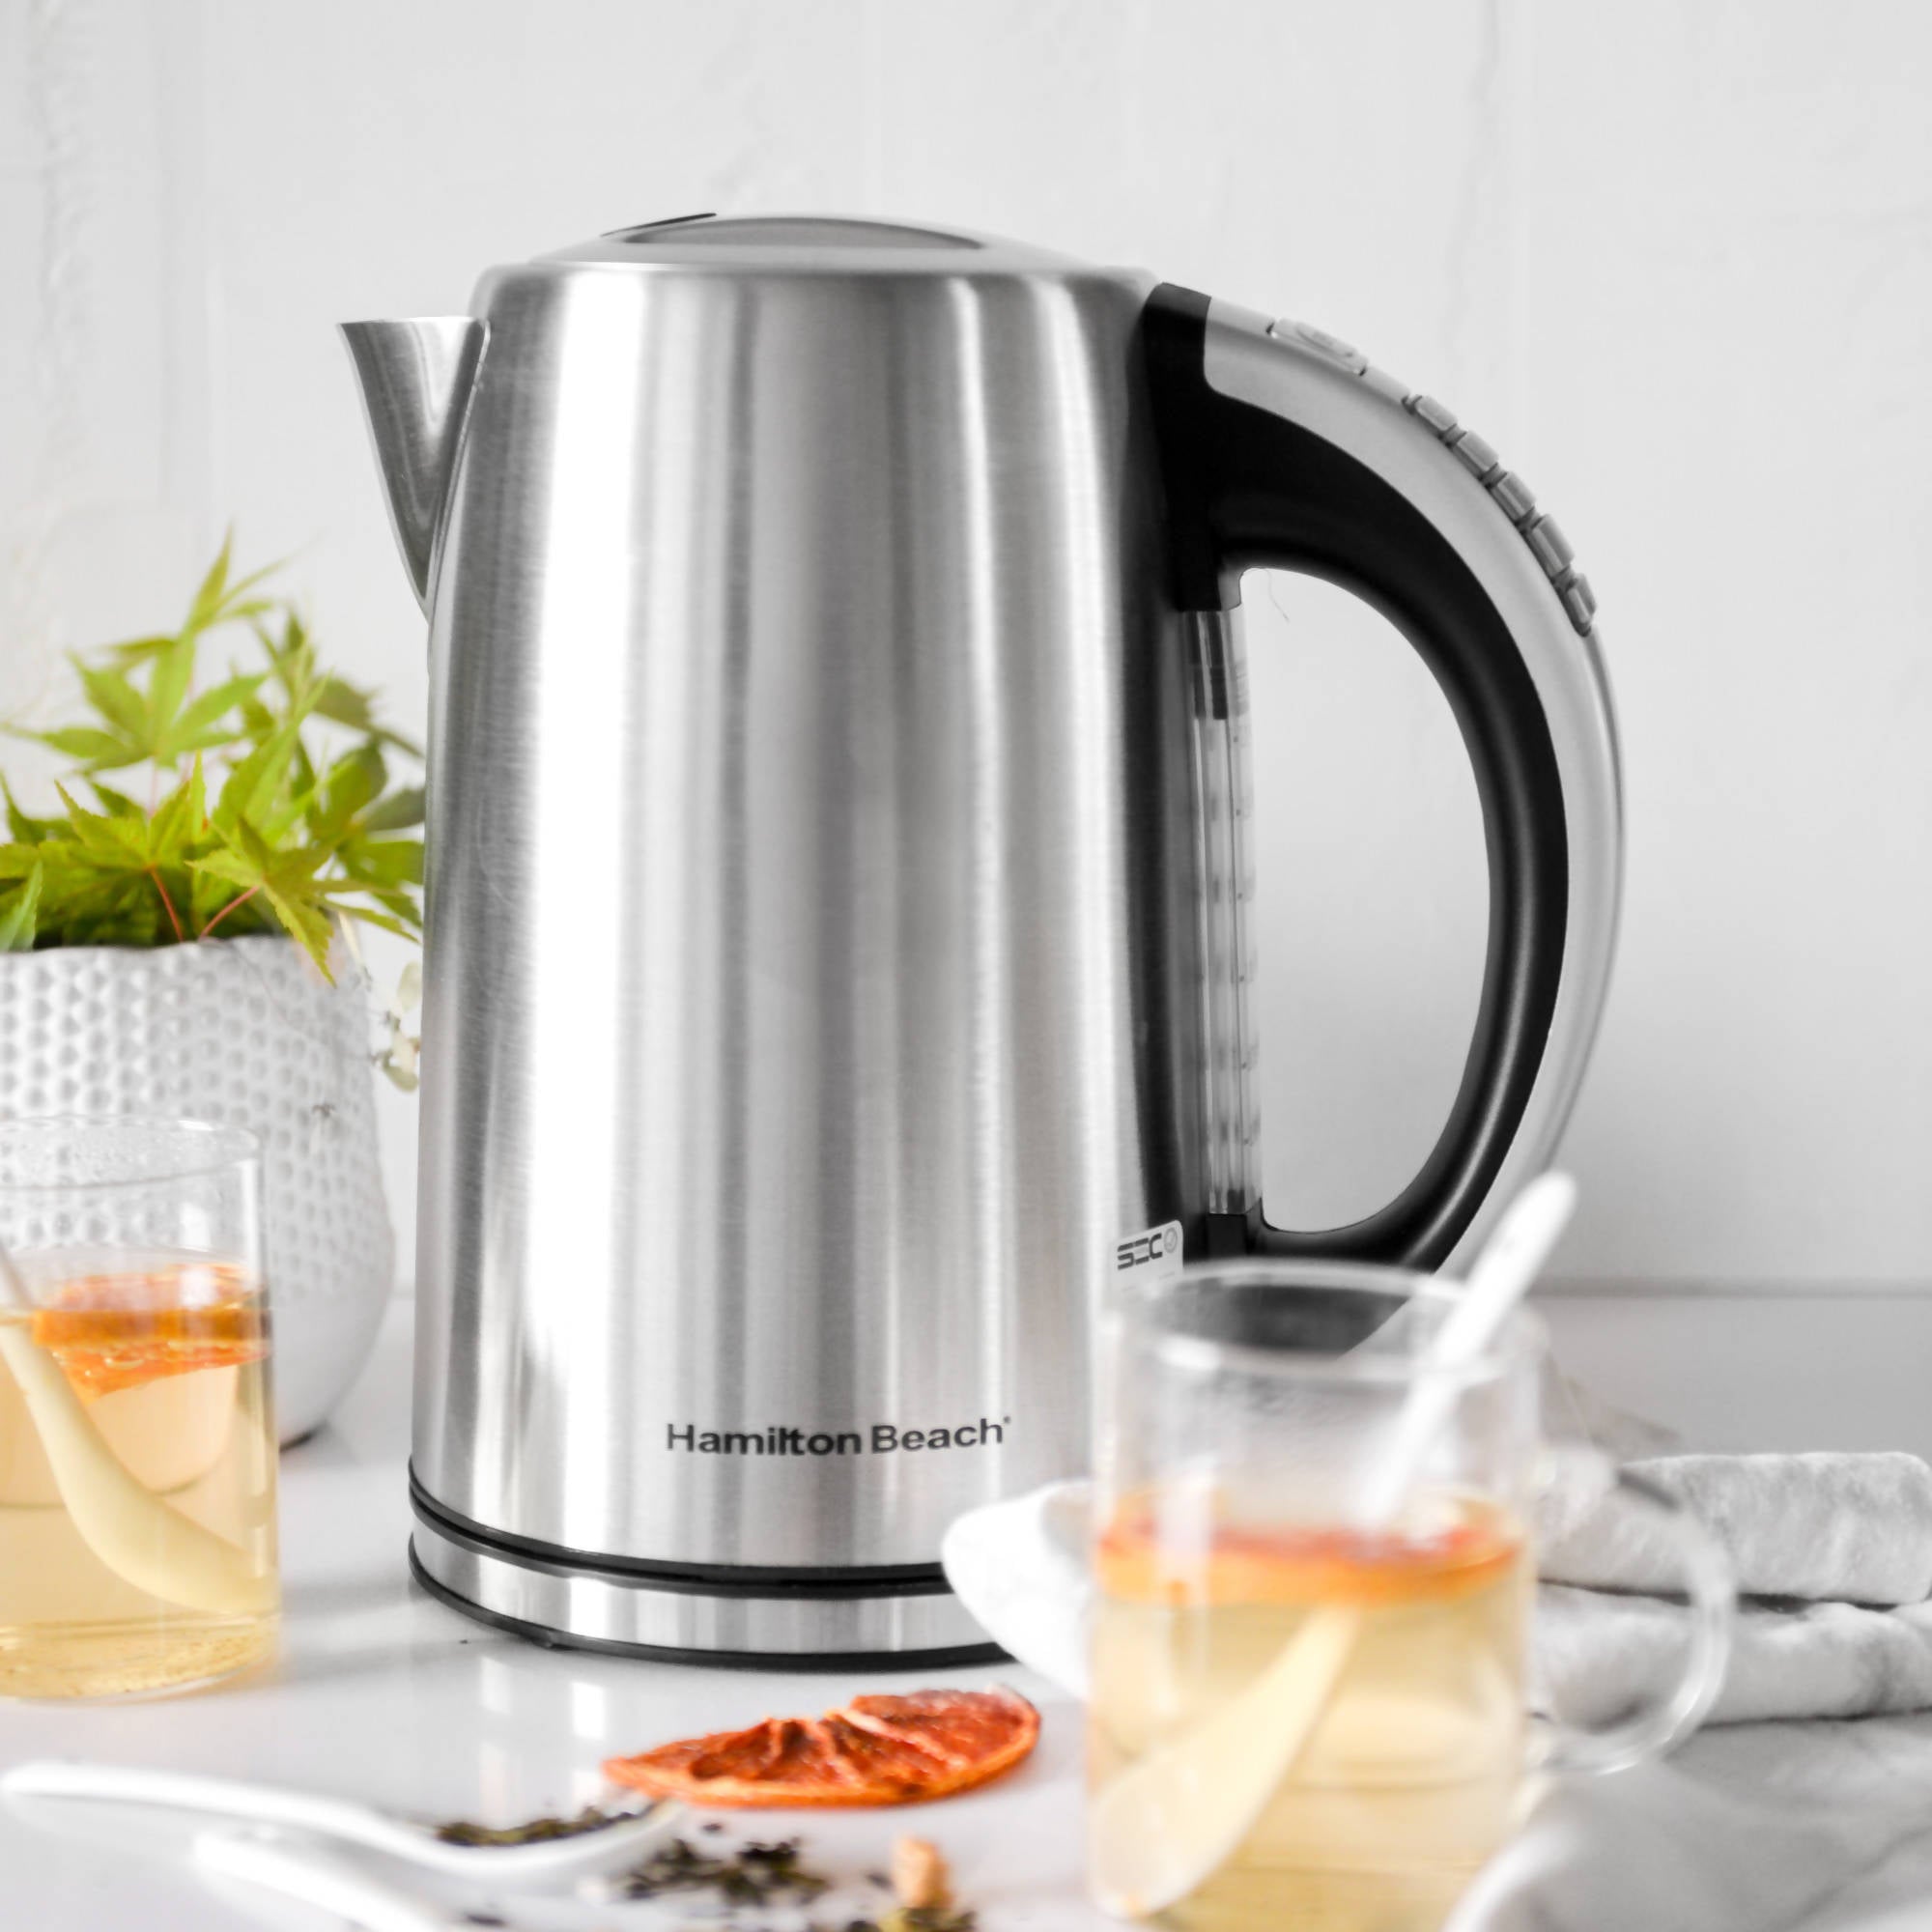 Hamilton Beach Variable Temperature Electric Kettle, Stainless Steel -  41020R